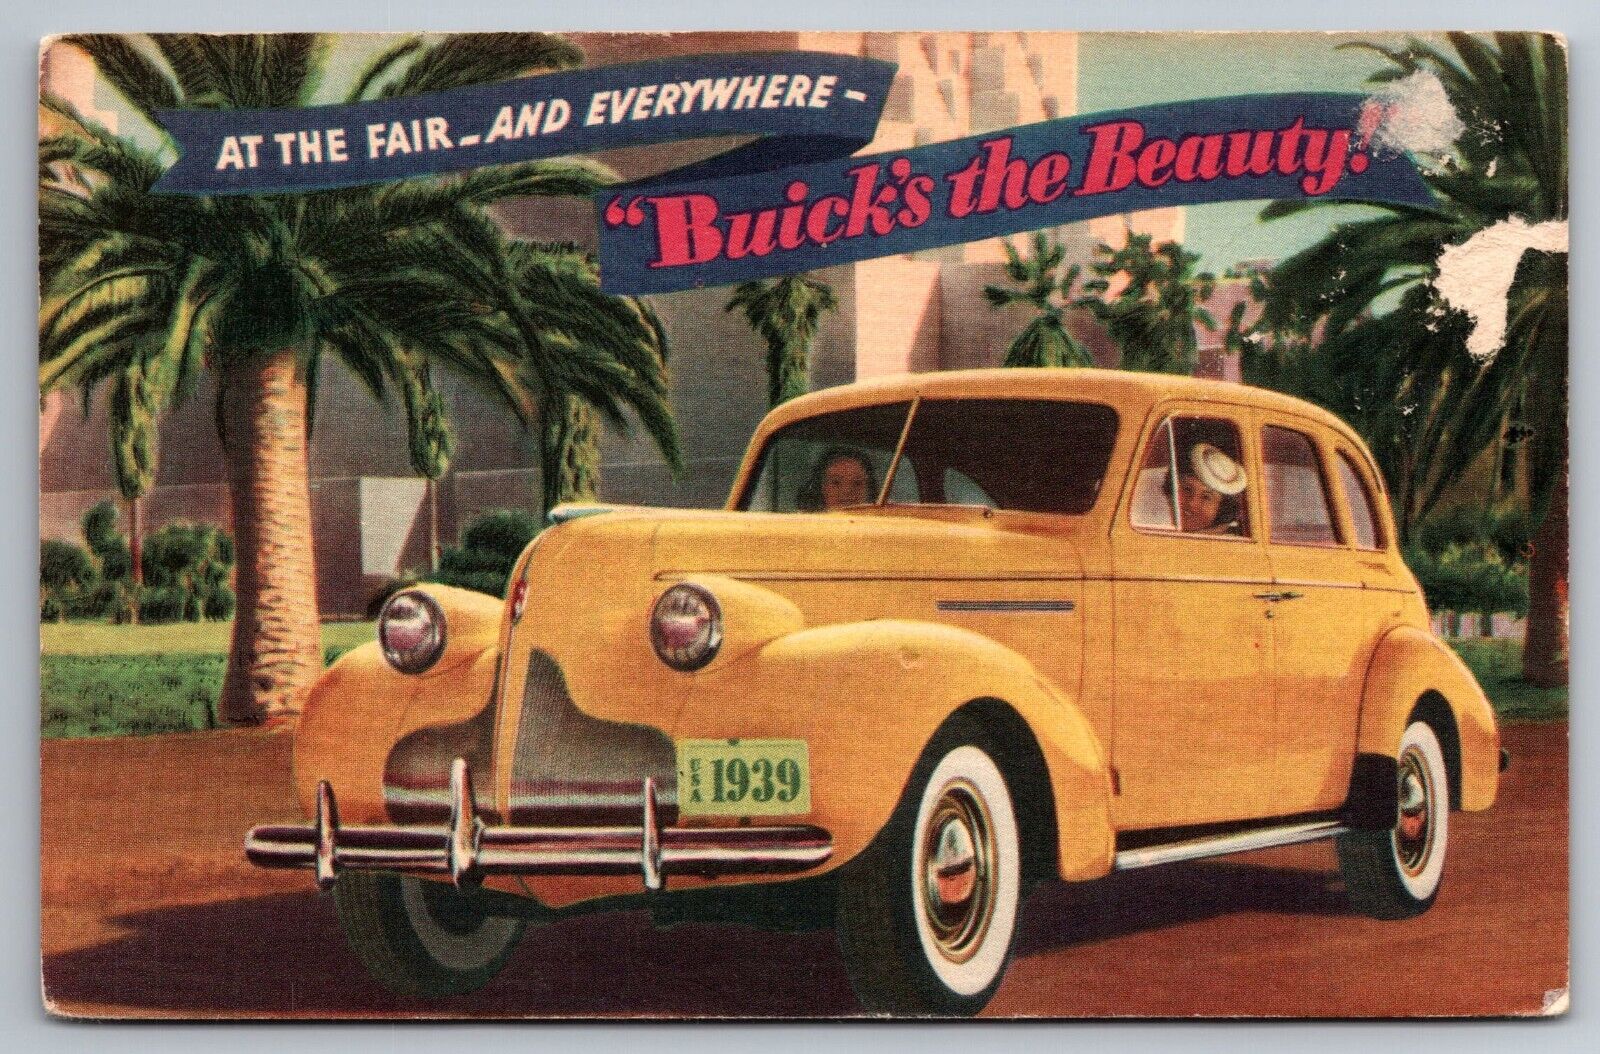 1939 Buick, At The Fair And Everywhere Buick\'s The Beauty, Postcard N713